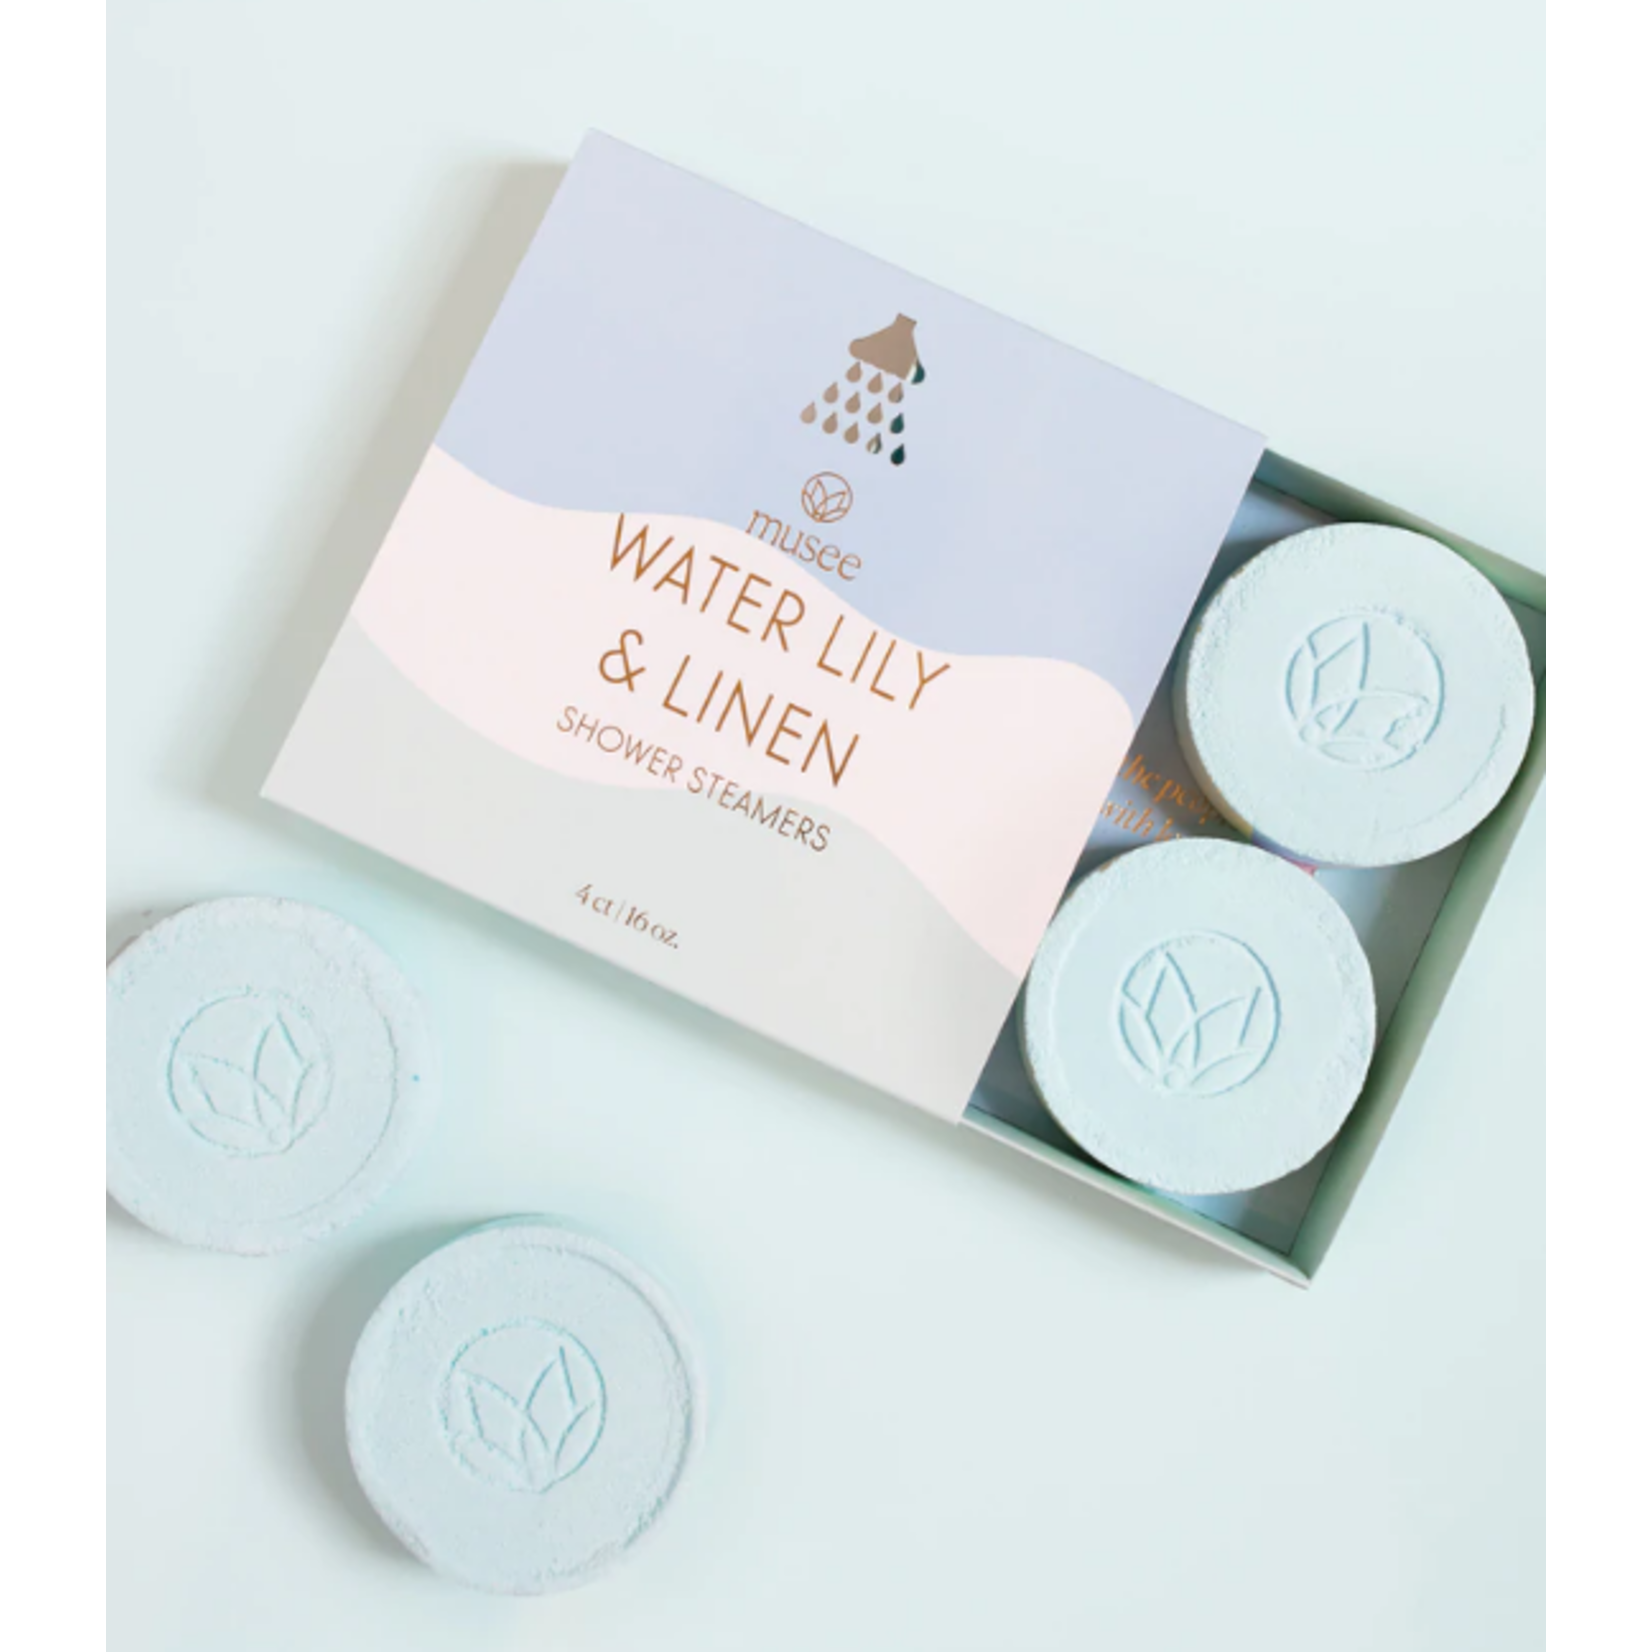 musee Water Lily & Linen Shower Steamers